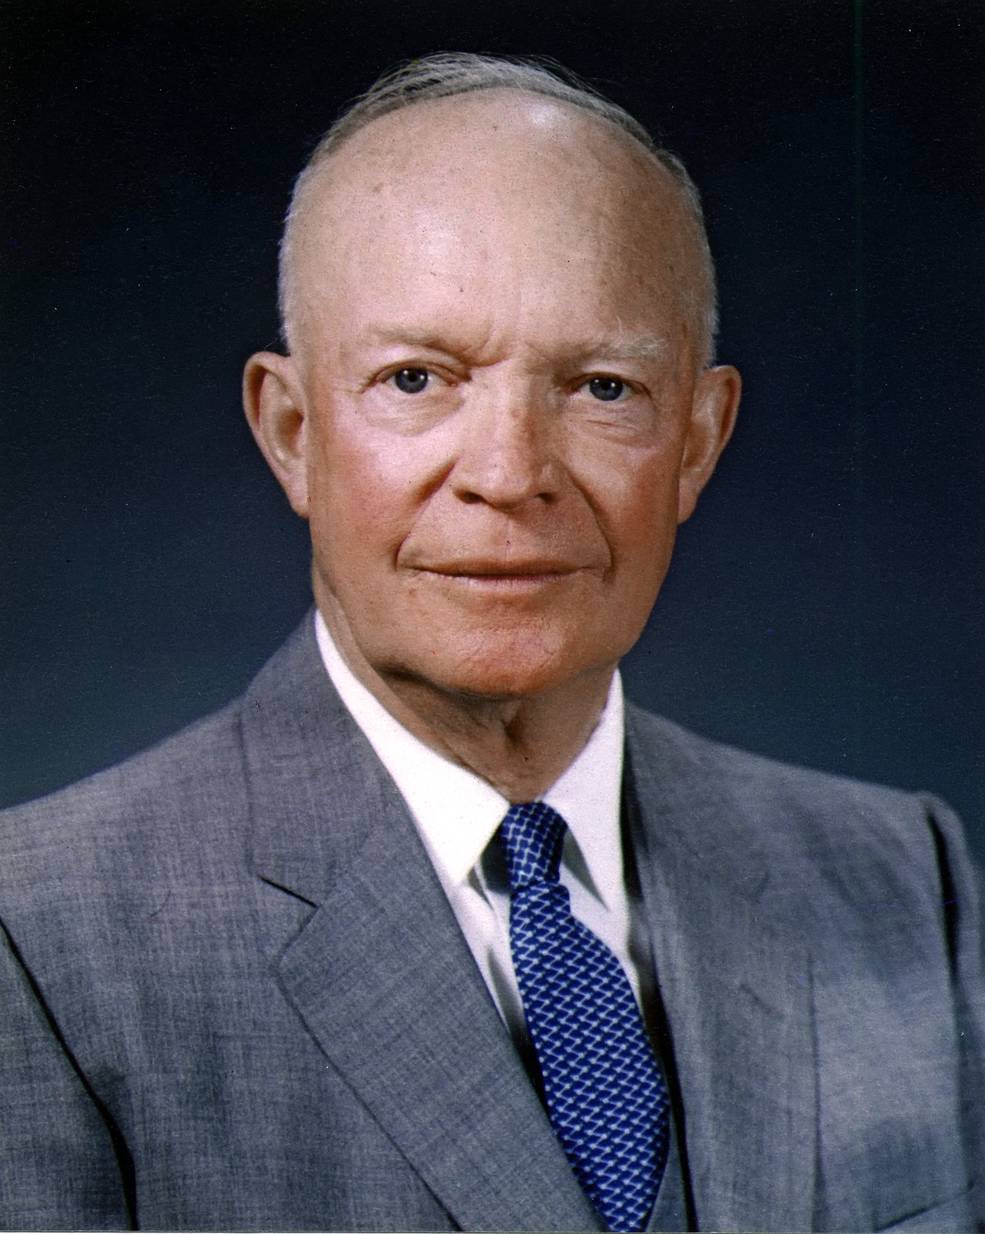 dwight_d_eisenhower_official_photo_portrait_may_29_1959